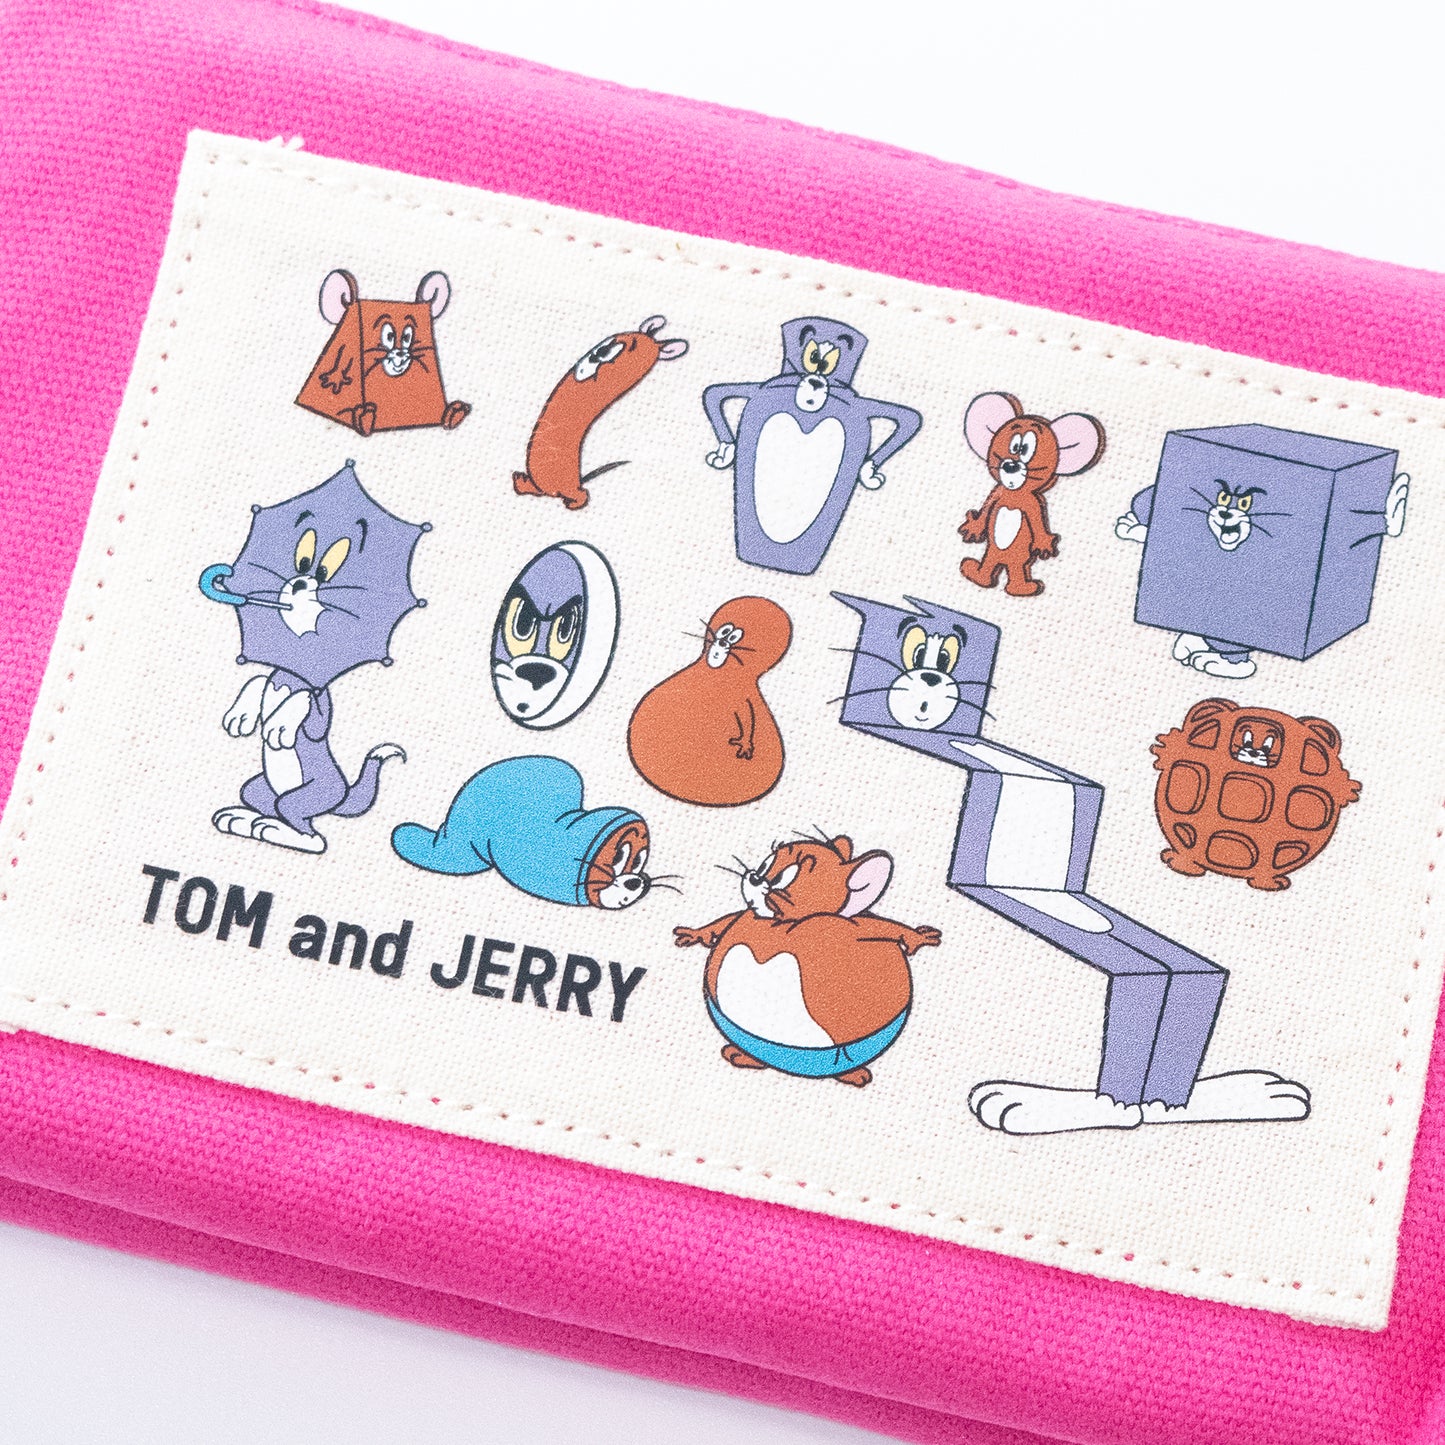 Tom and Jerry Canvas Pouch PINK